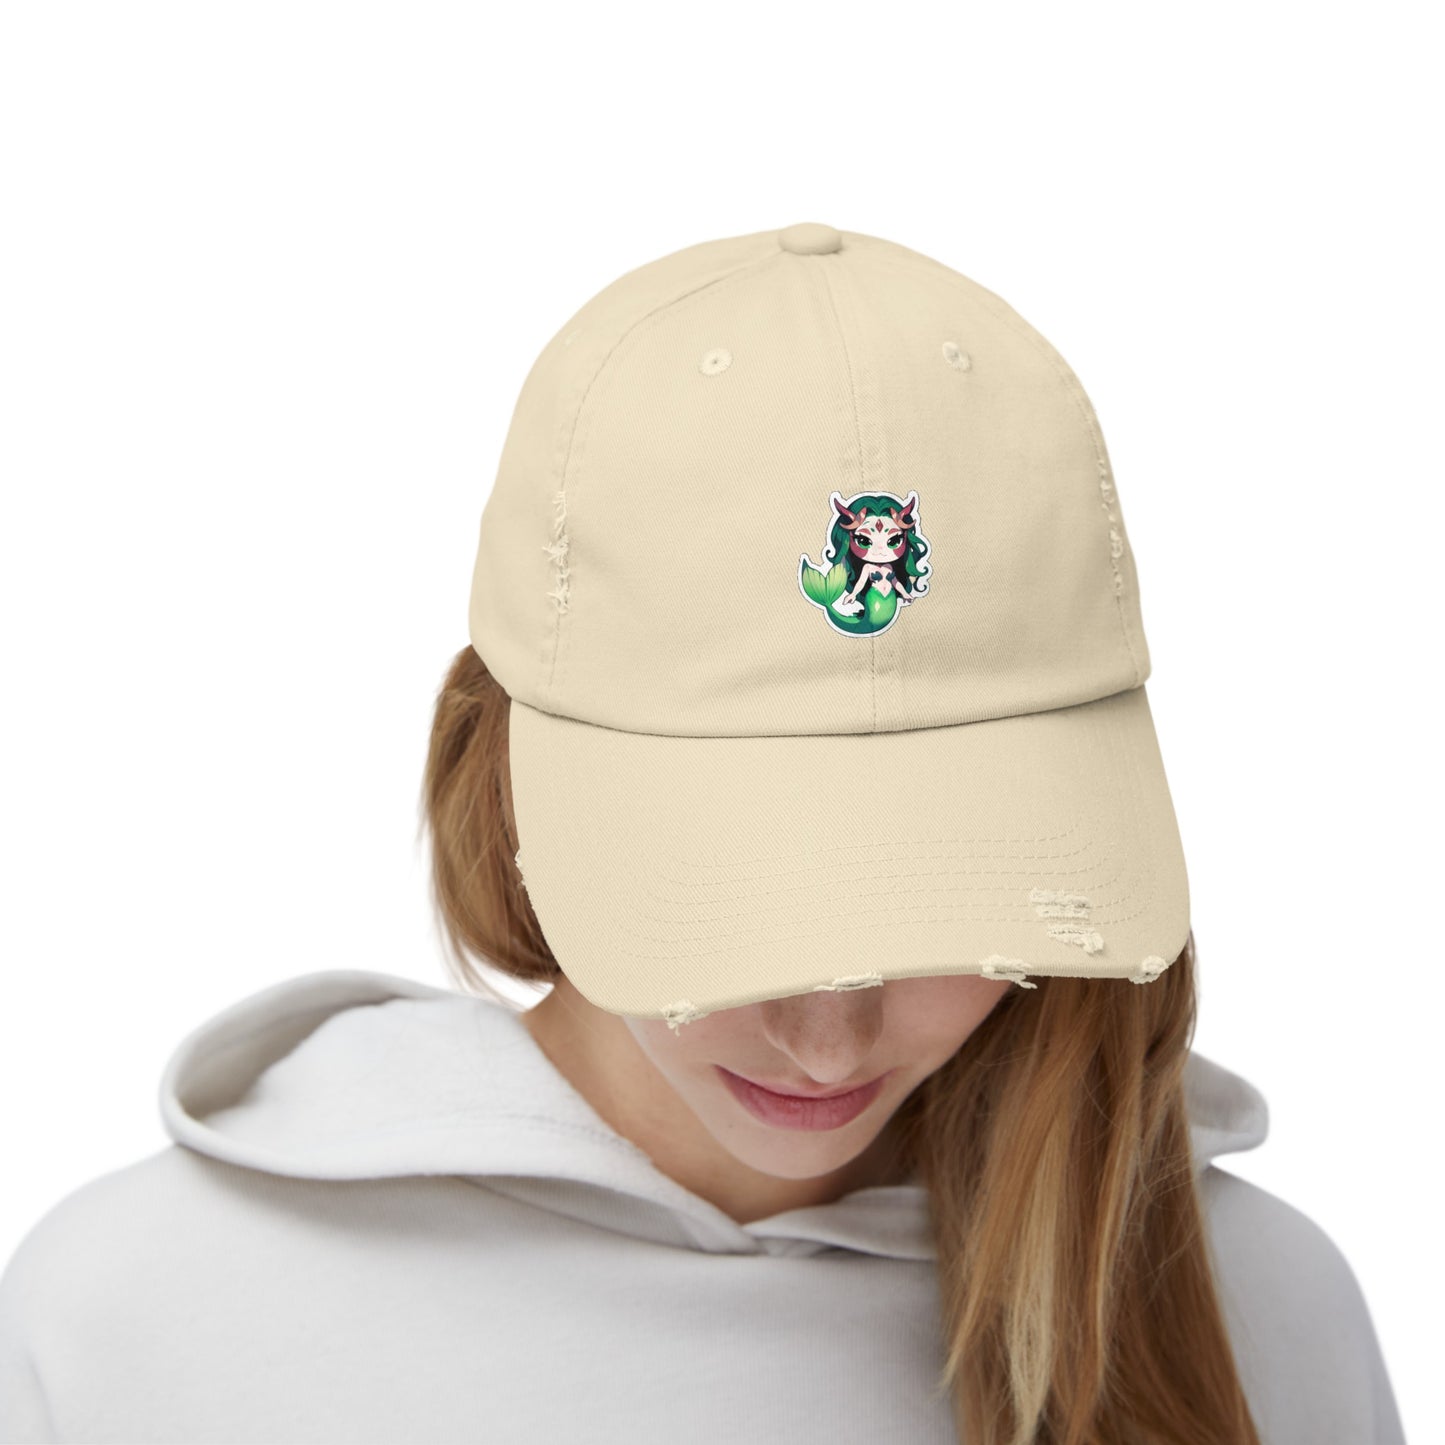 Anime Style Art Unisex Distressed Cap- "The Lil Anime Friends #9"